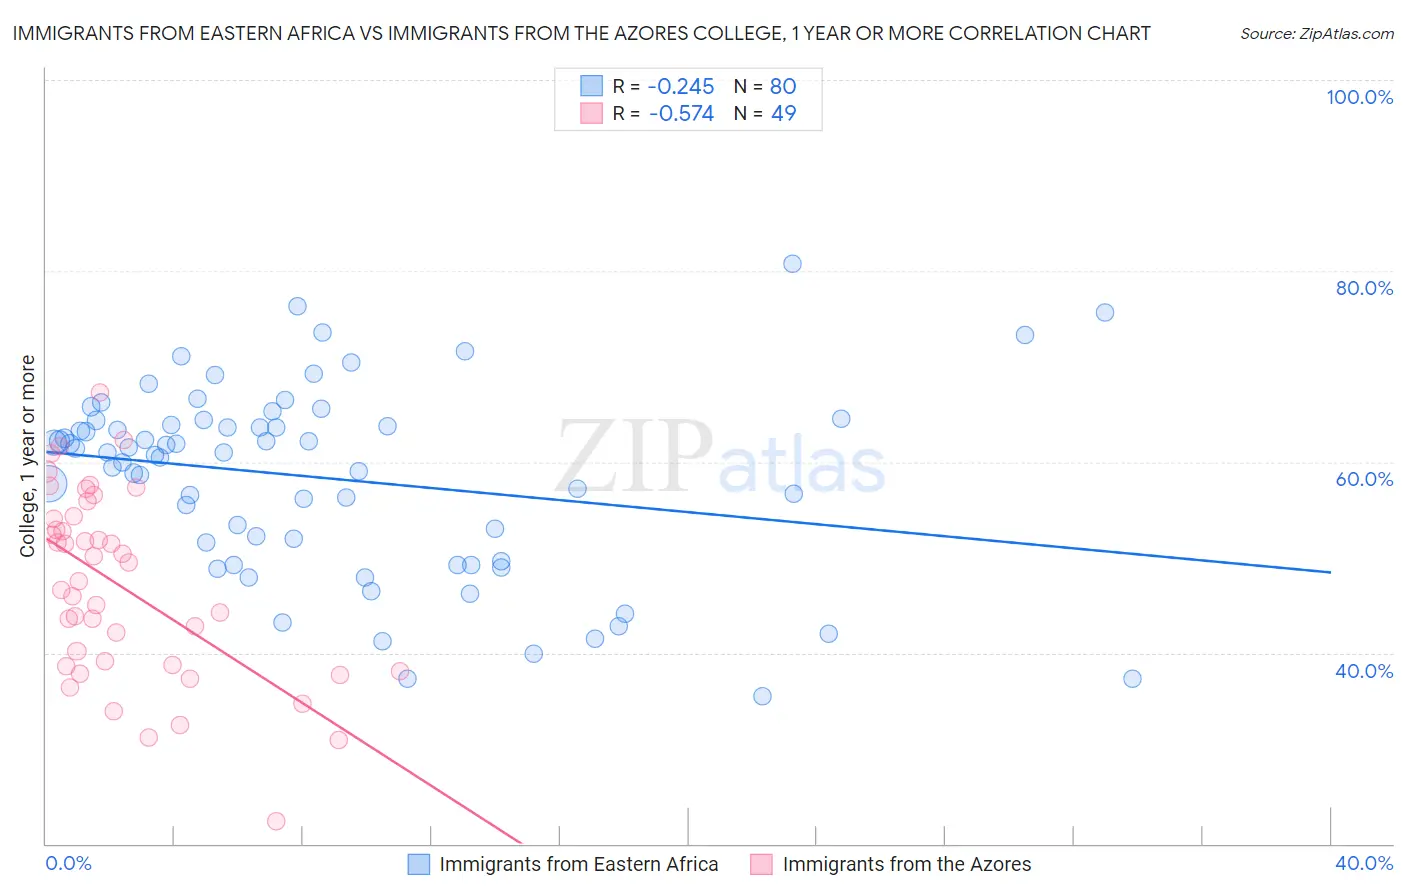 Immigrants from Eastern Africa vs Immigrants from the Azores College, 1 year or more